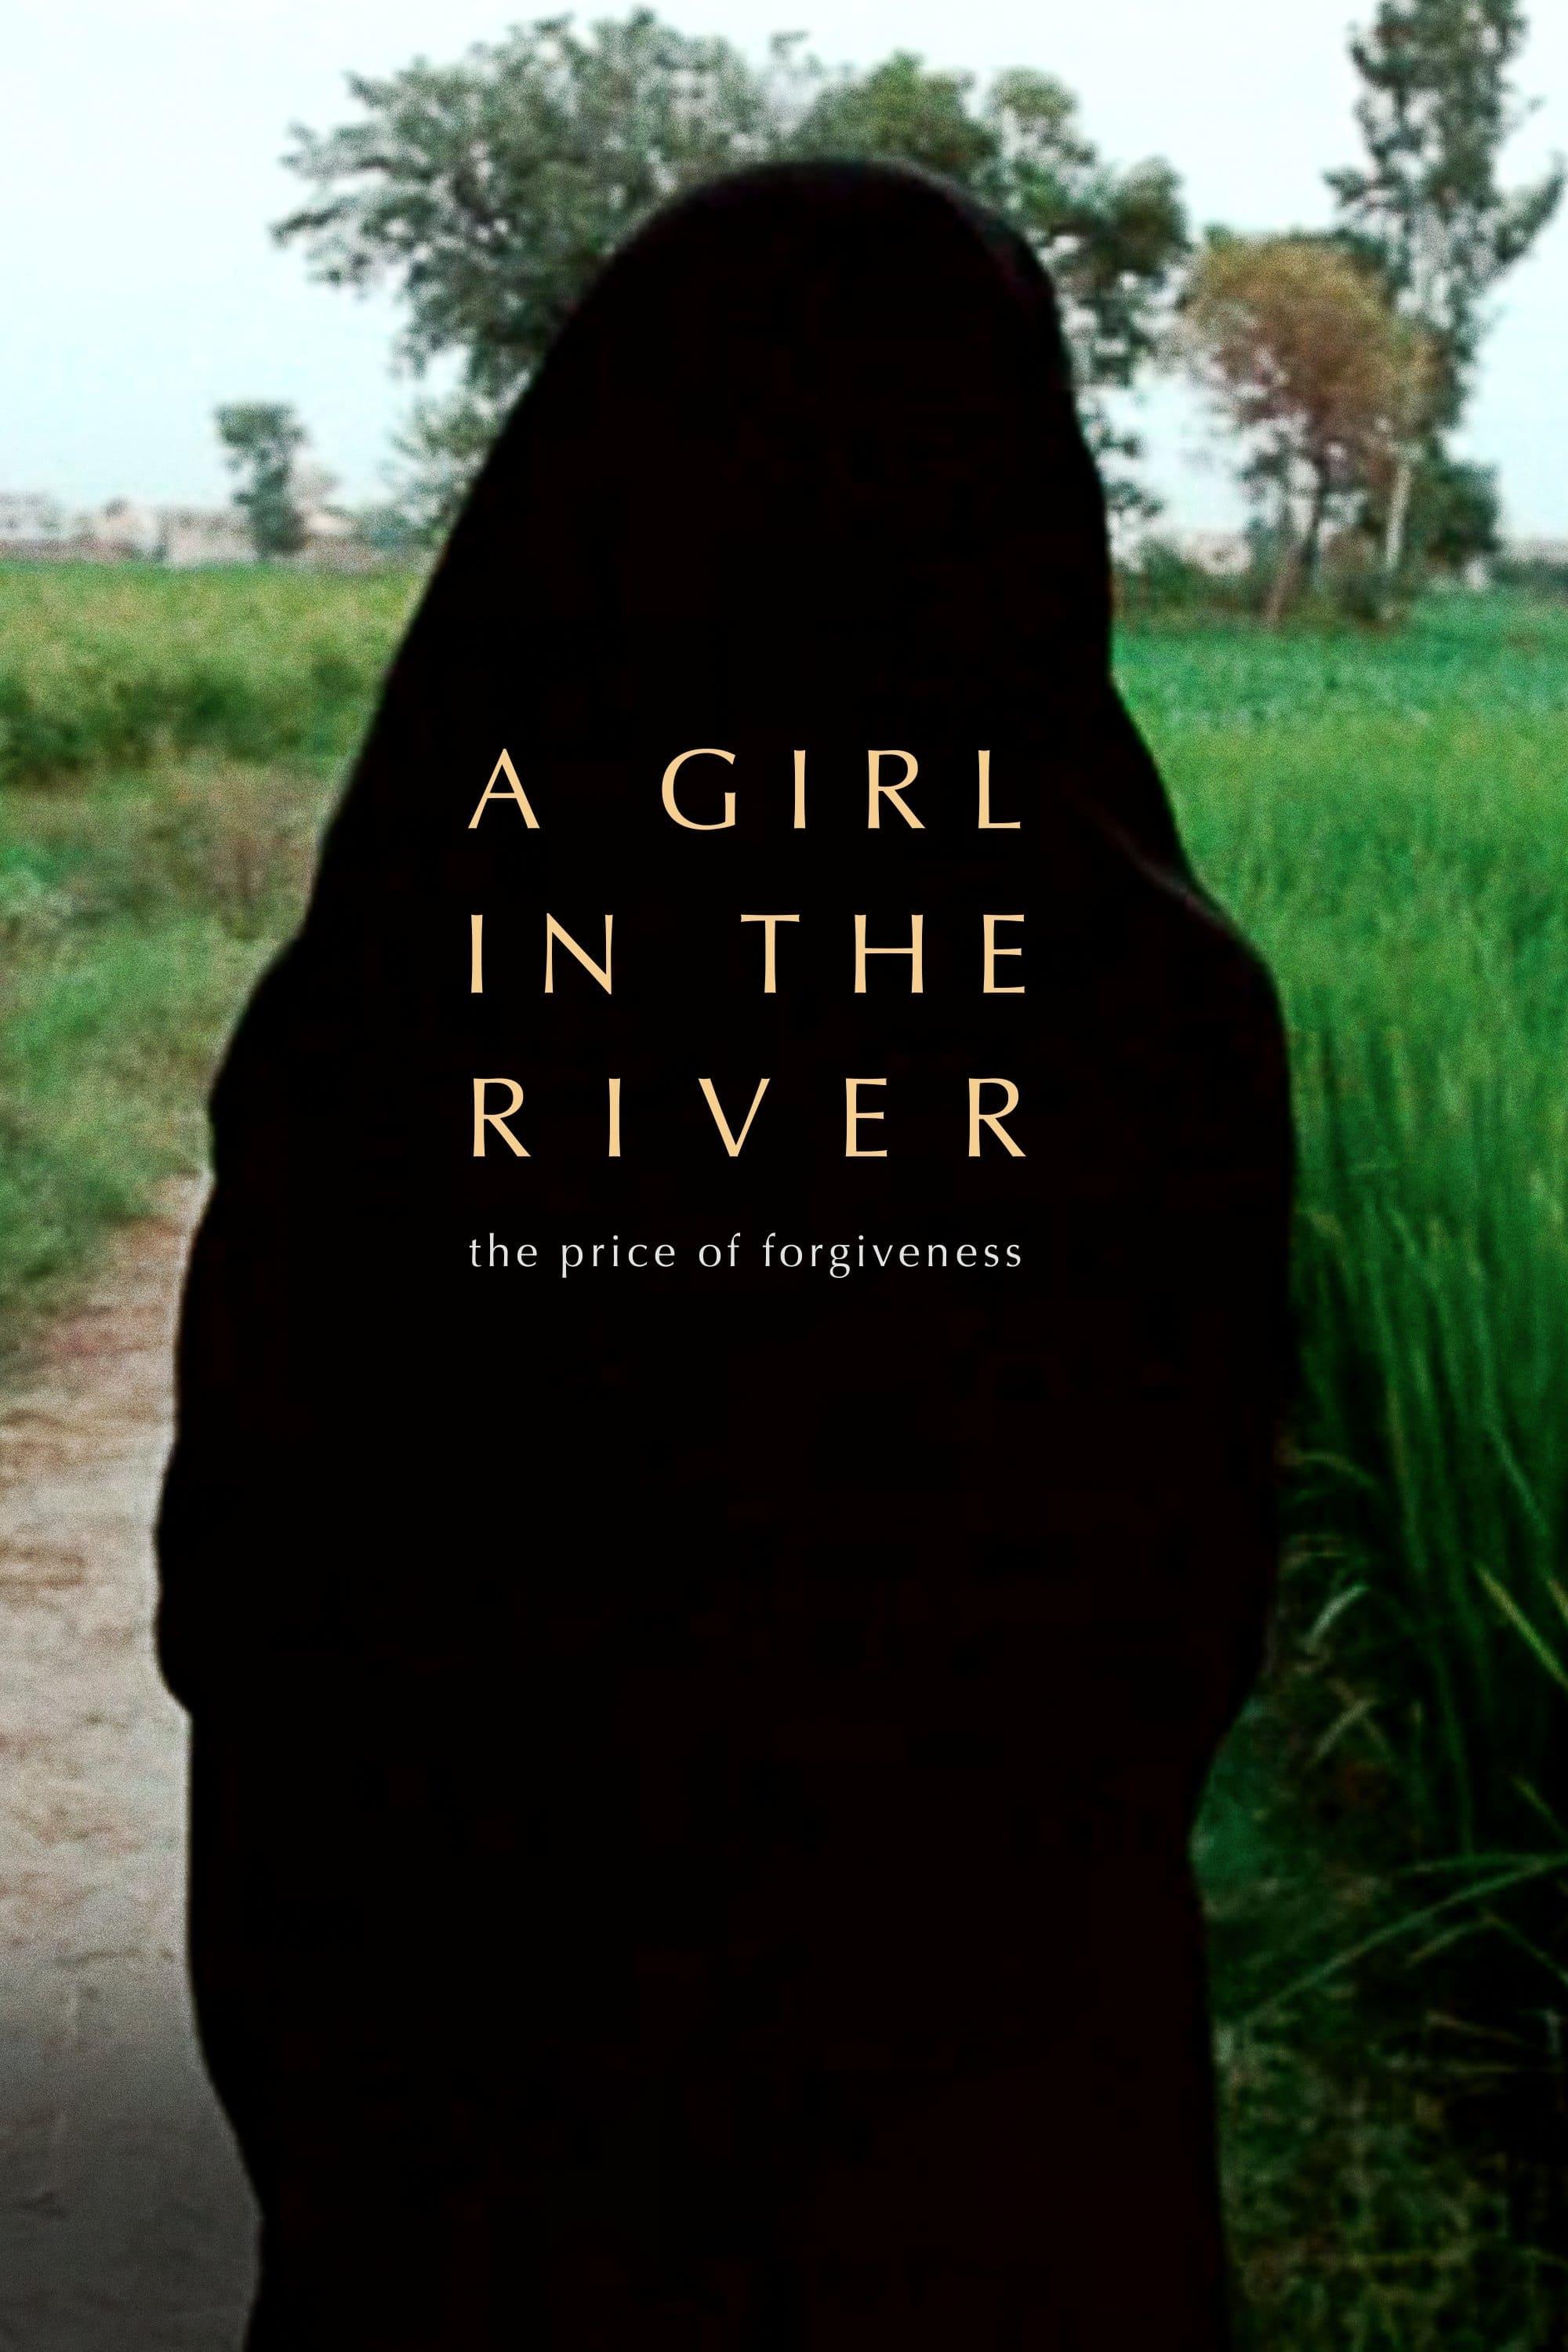 A Girl in the River: The Price of Forgiveness poster